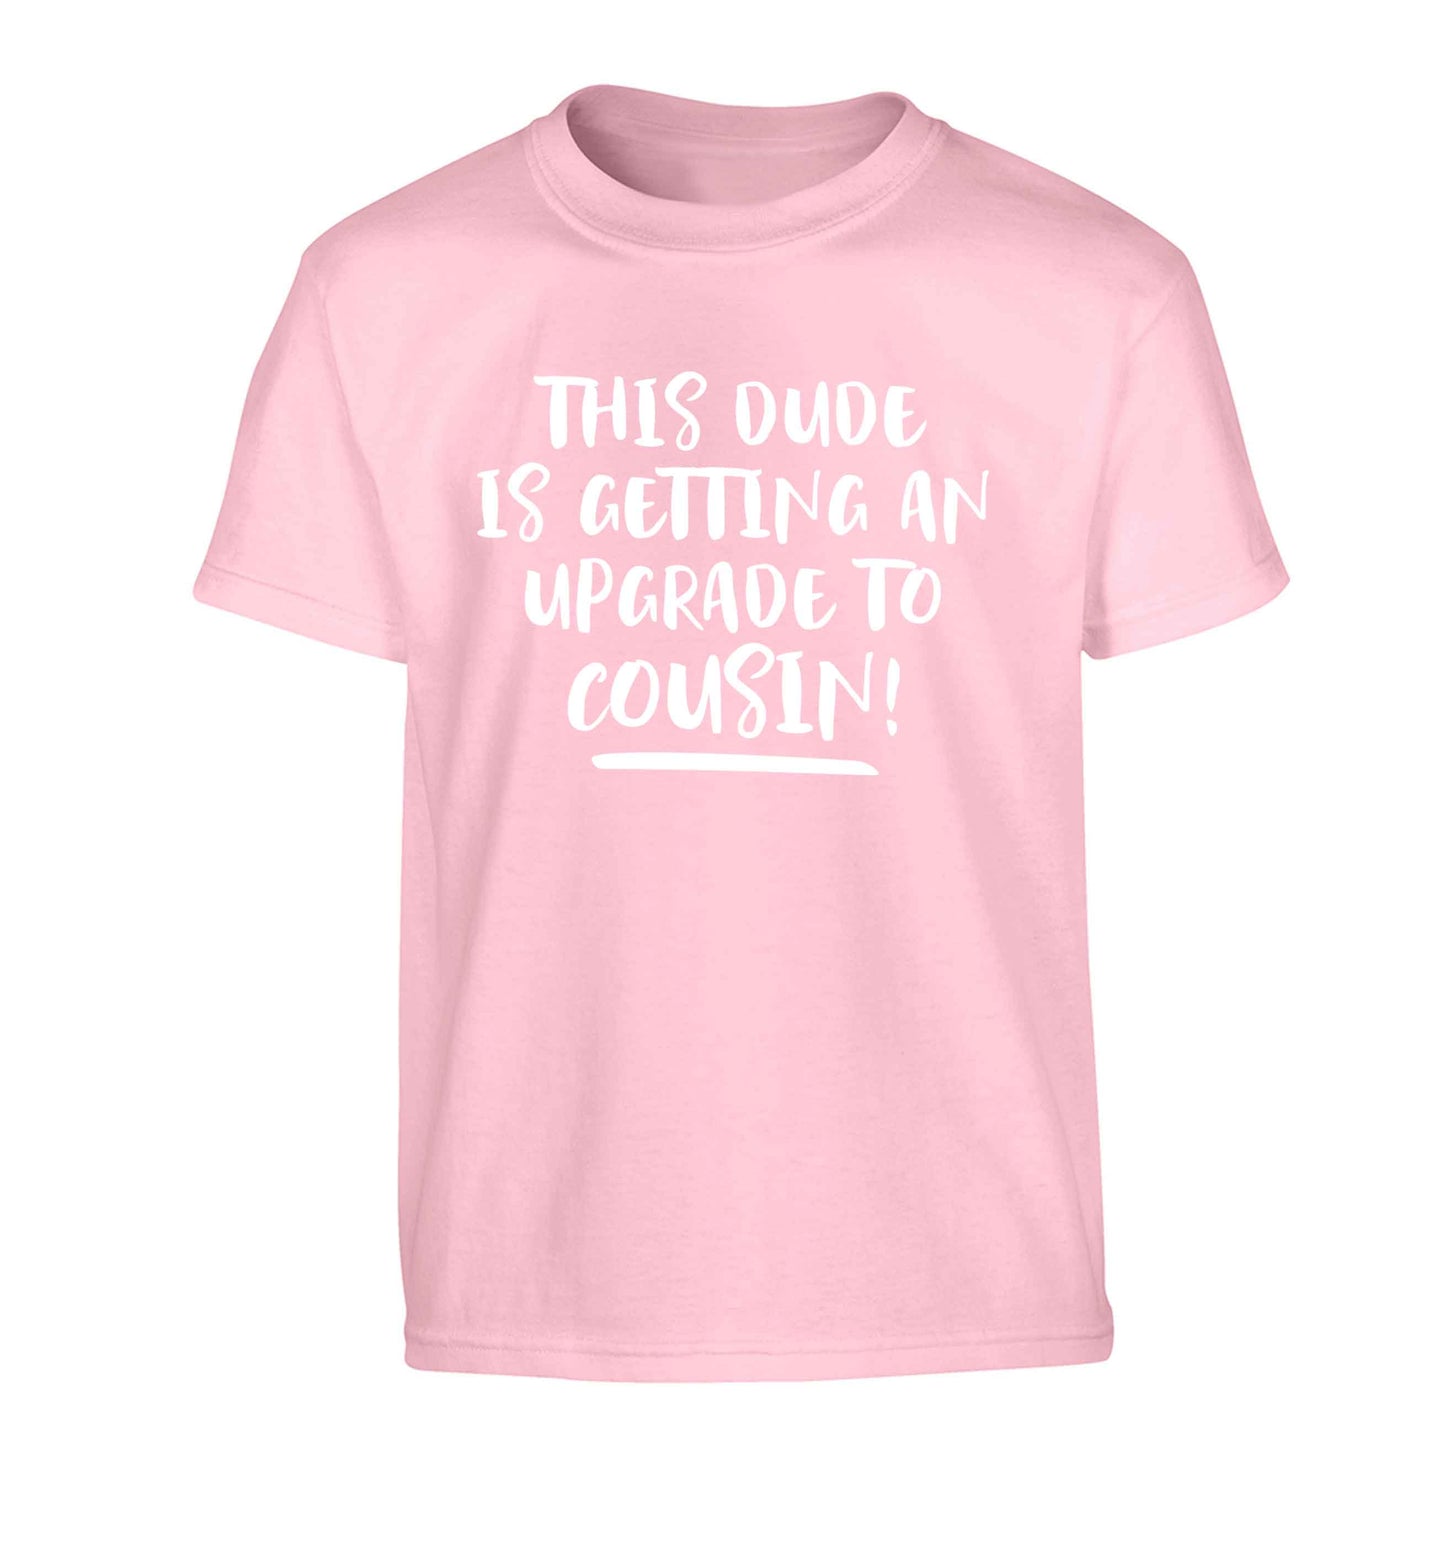 This dude is getting an upgrade to cousin! Children's light pink Tshirt 12-13 Years